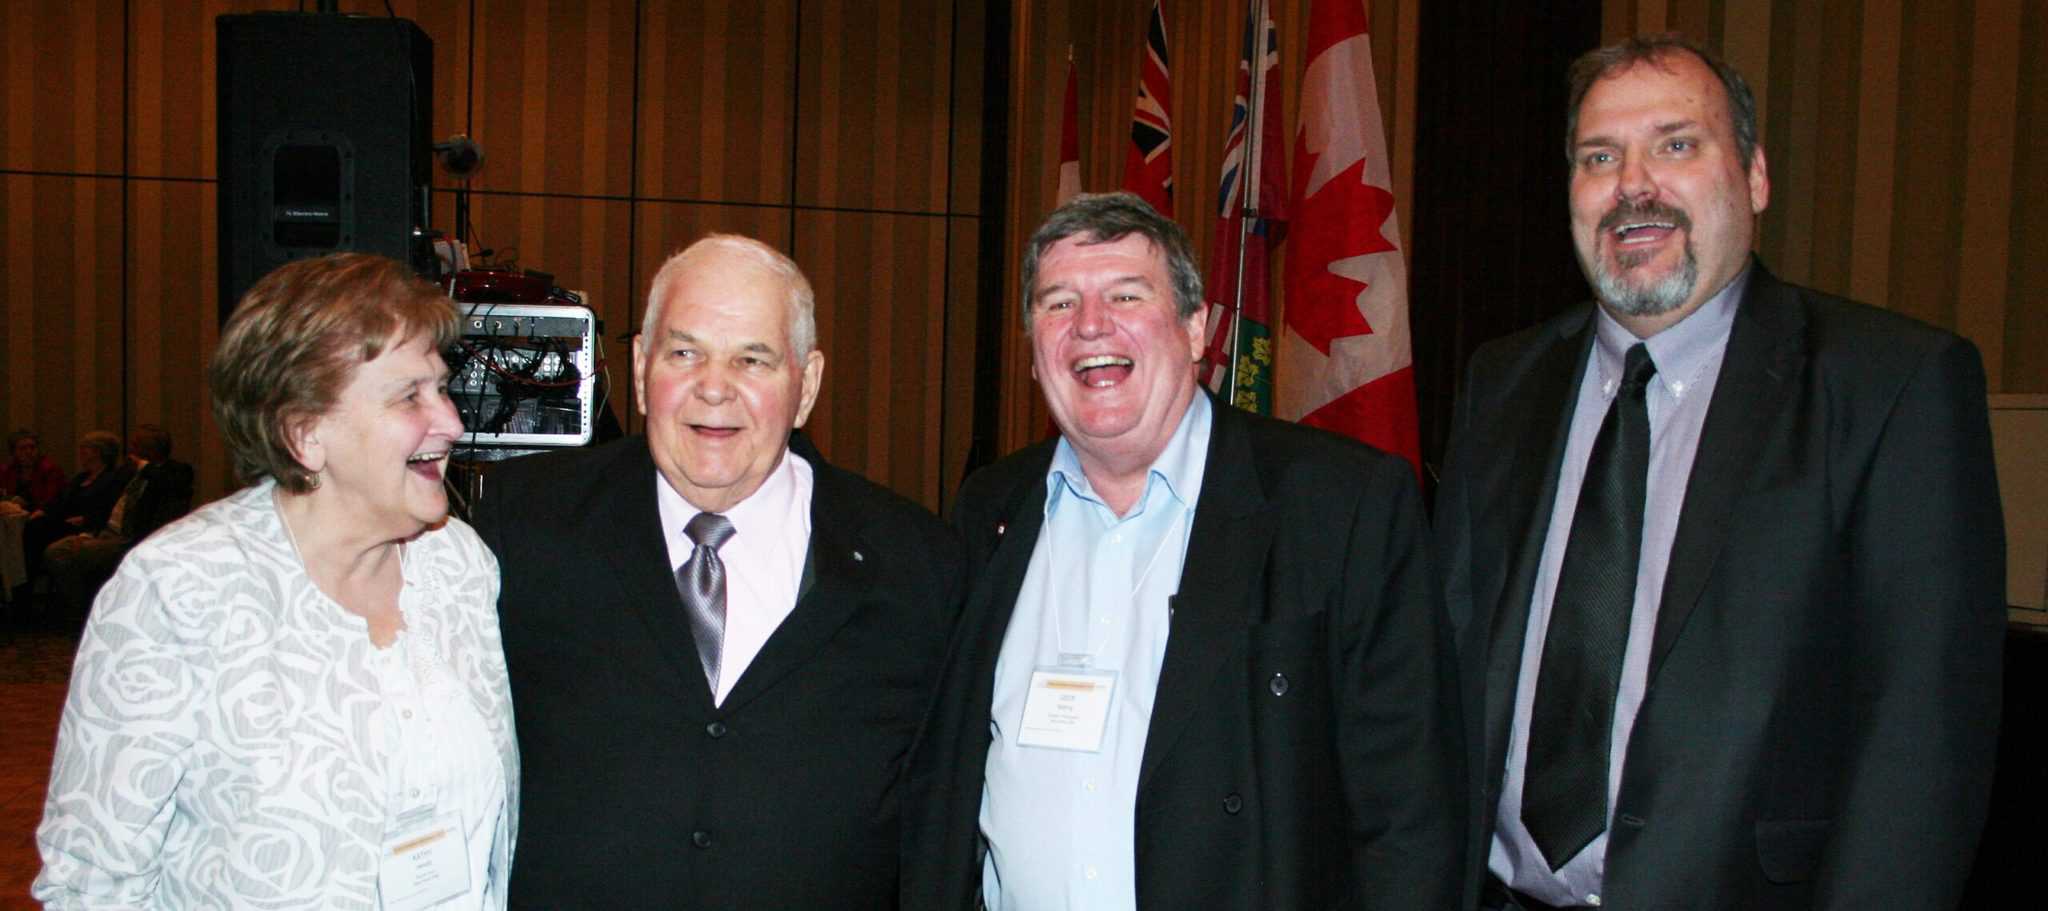 Pictured left to right - Kathy Hewitt, Randy Sheppard, Geof Botting and Michael Barrett